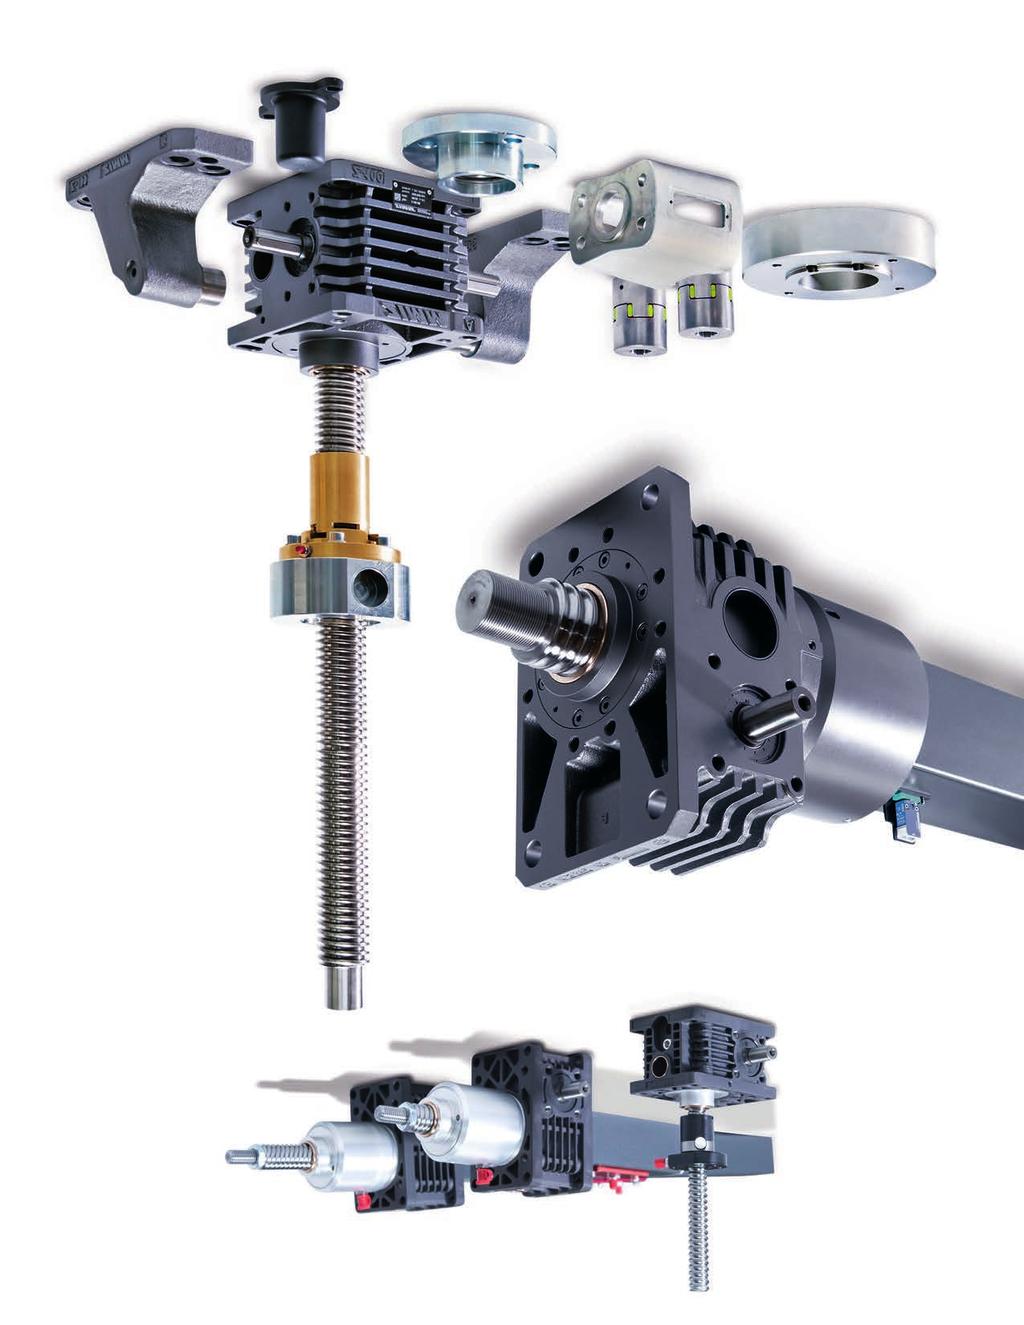 POGAM, MAKET EGMENT Program benefits Precision acme and ball screws Translating and otating version Multiple spindle end connections Mutliple driving nut designs Modular housing for mounting